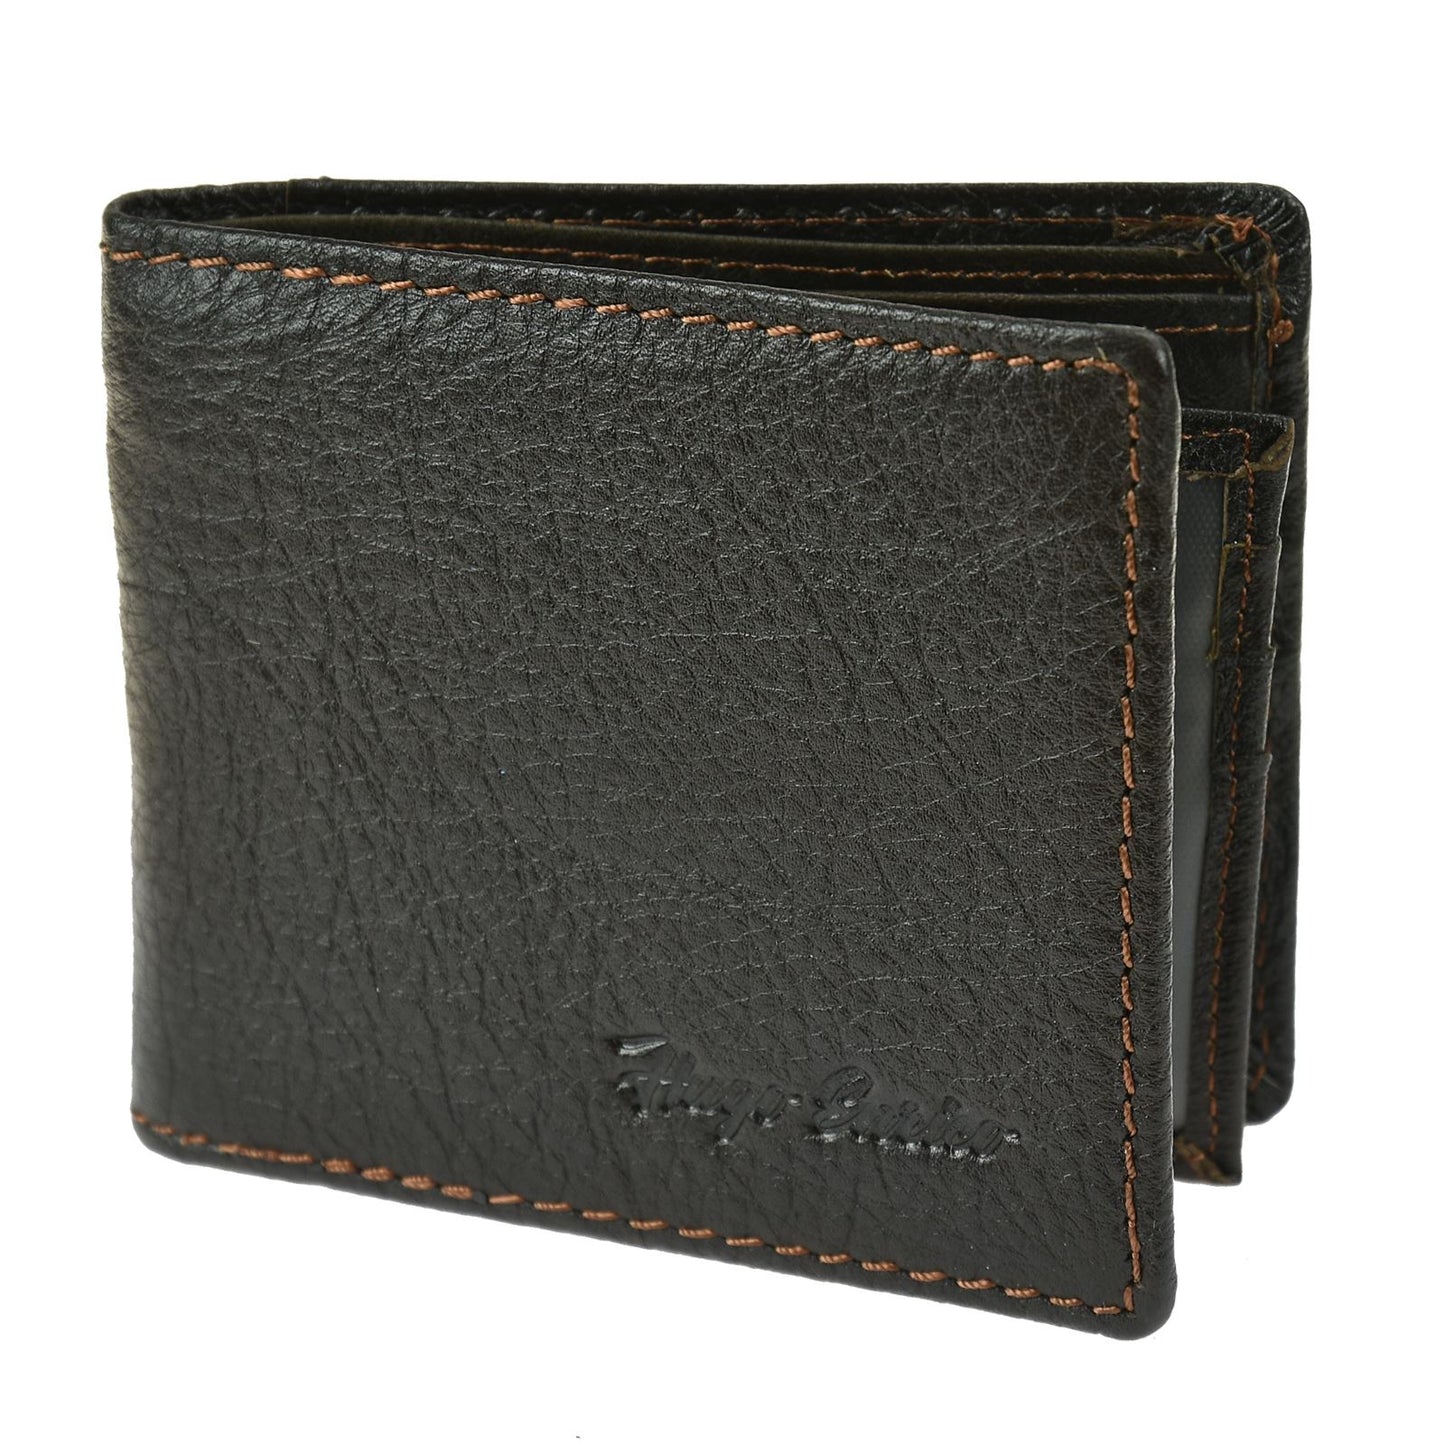 Stay Organized with a Hugo Enrico Wallet